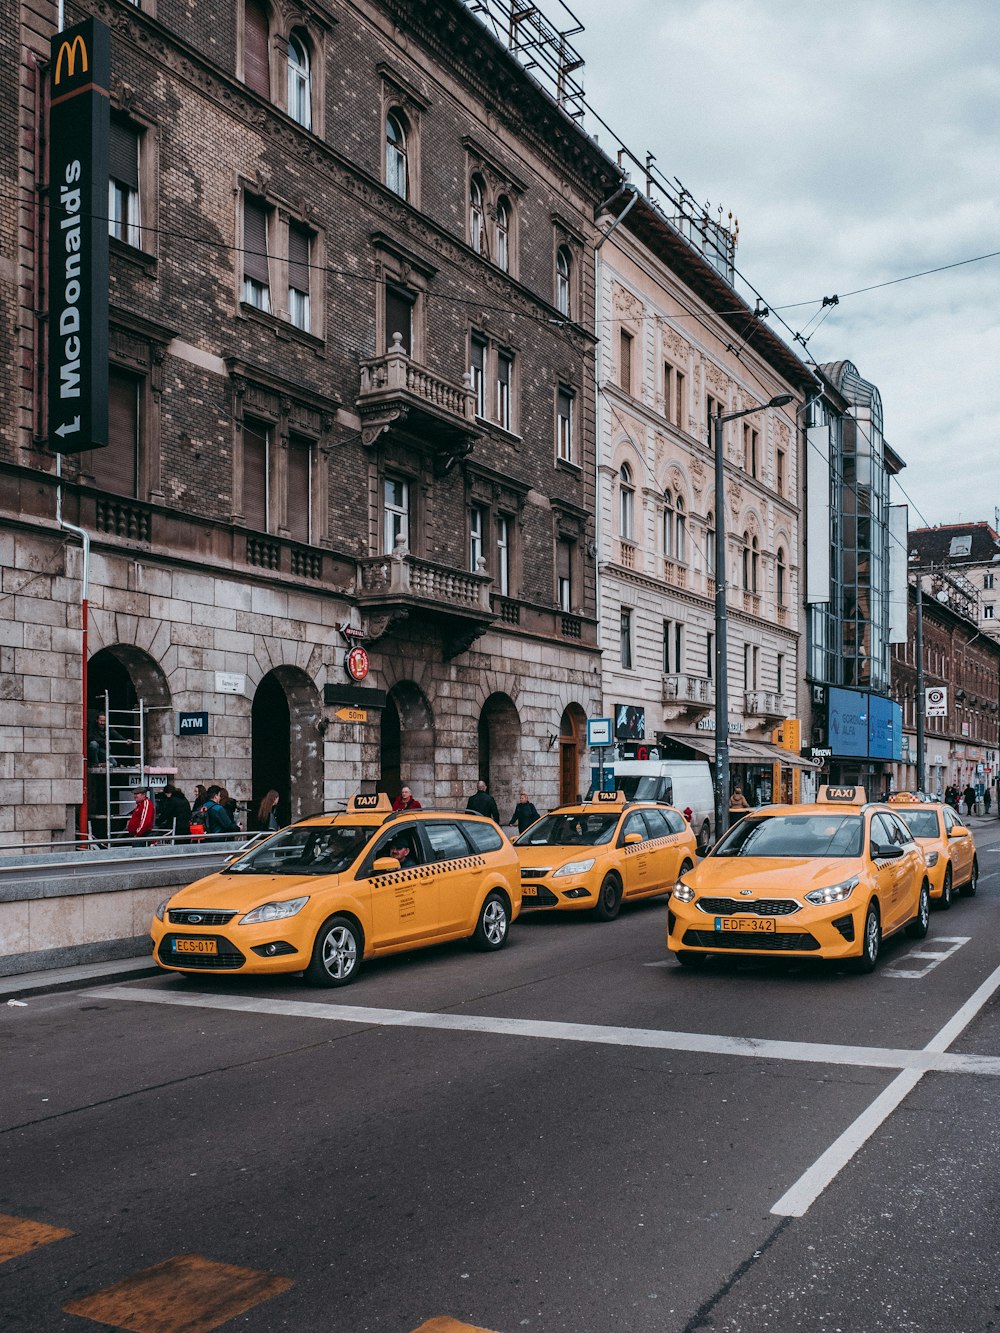 yellow taxi cab on street during daytime